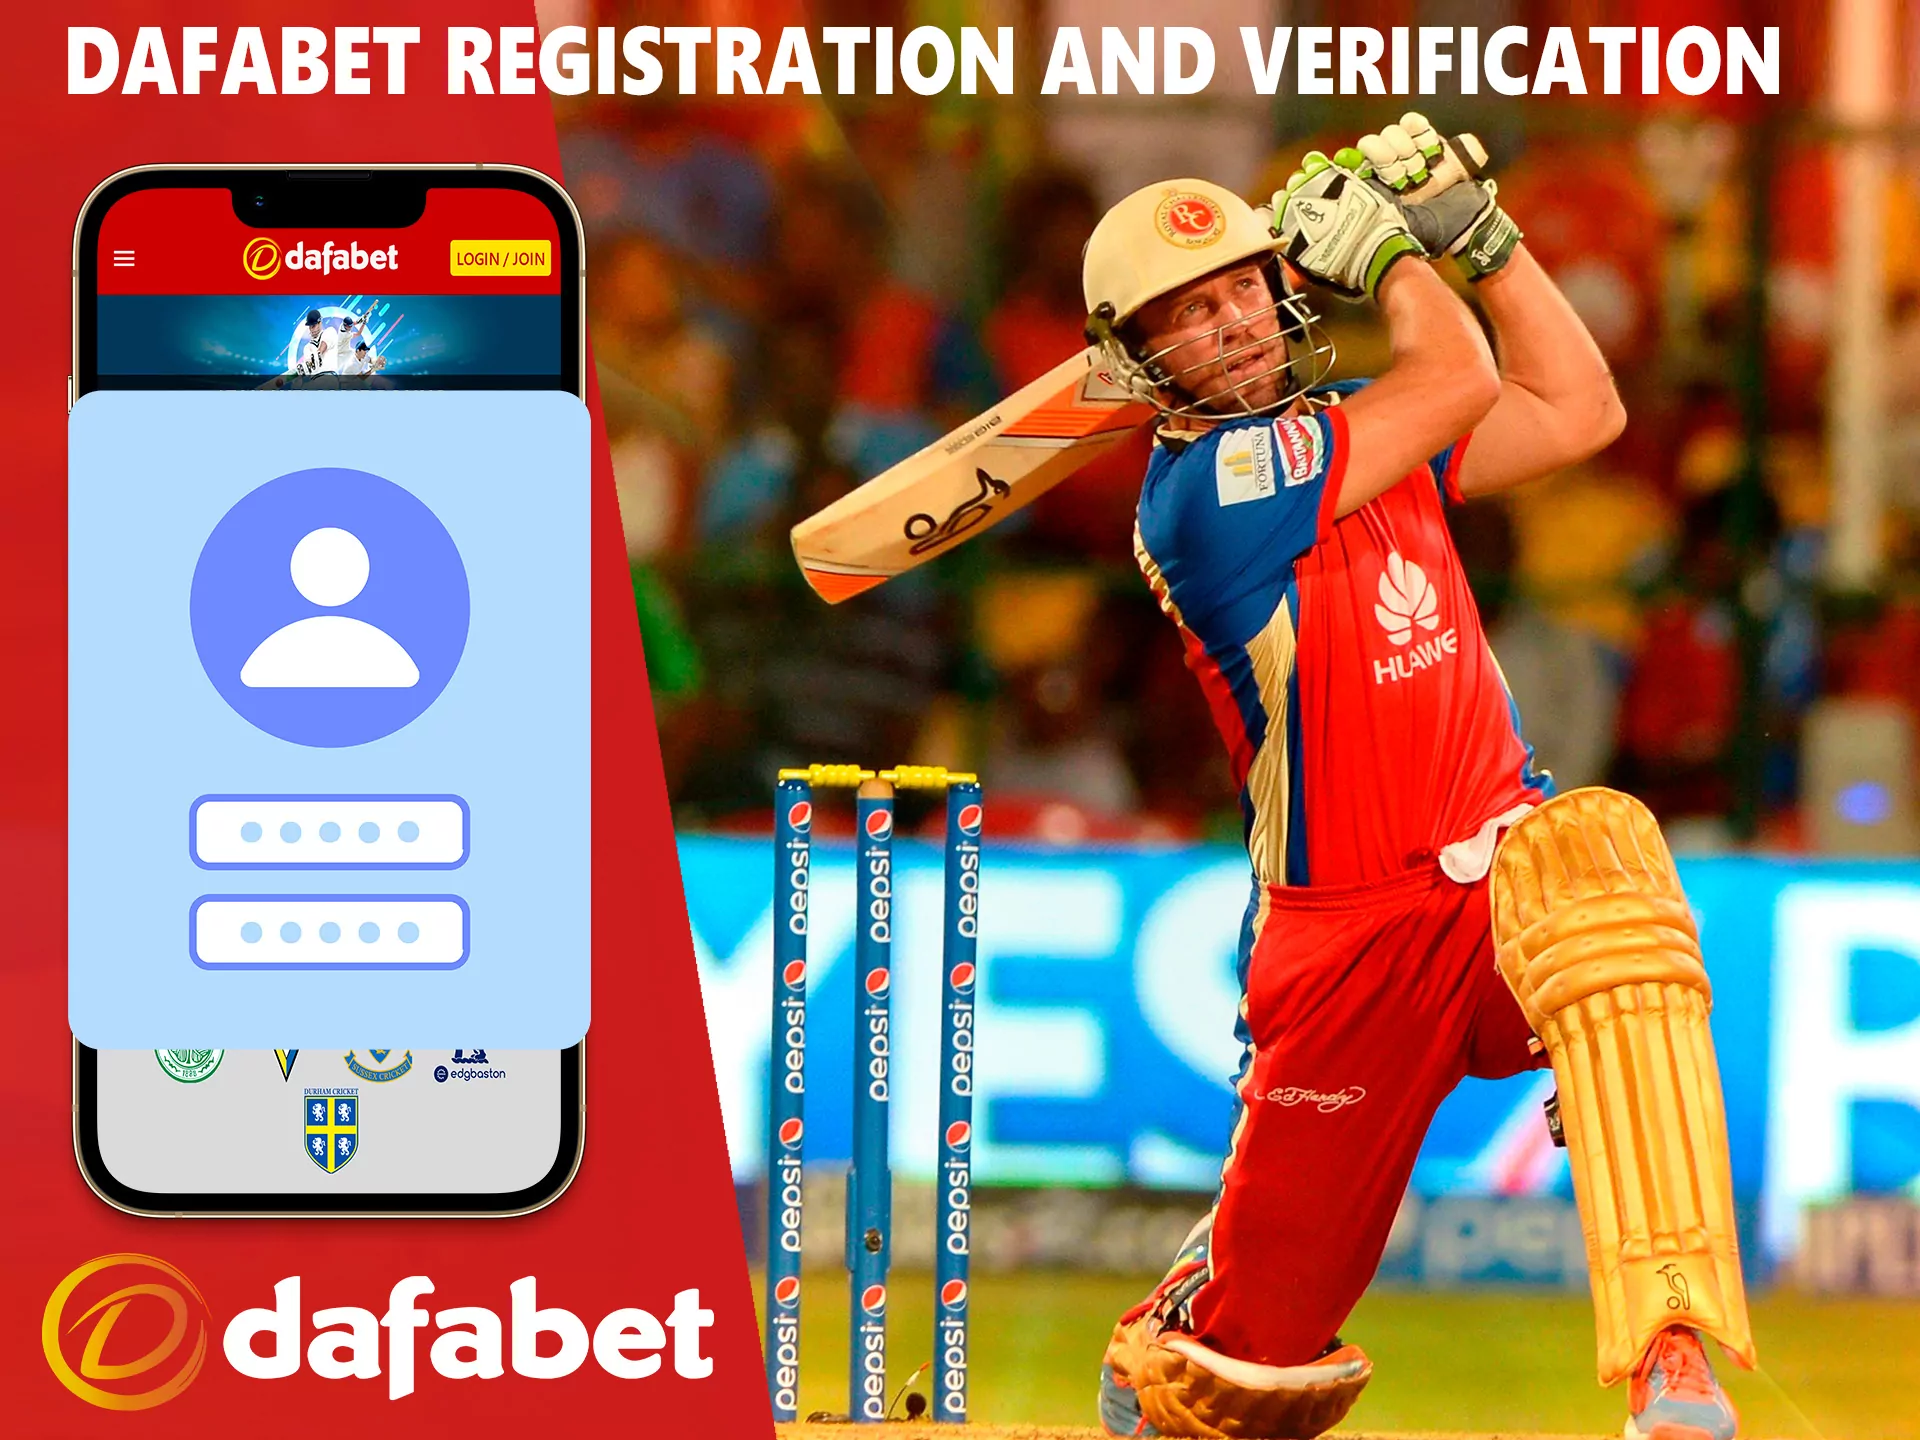 Simple and clear steps to register with the Dafabet bookmaker.